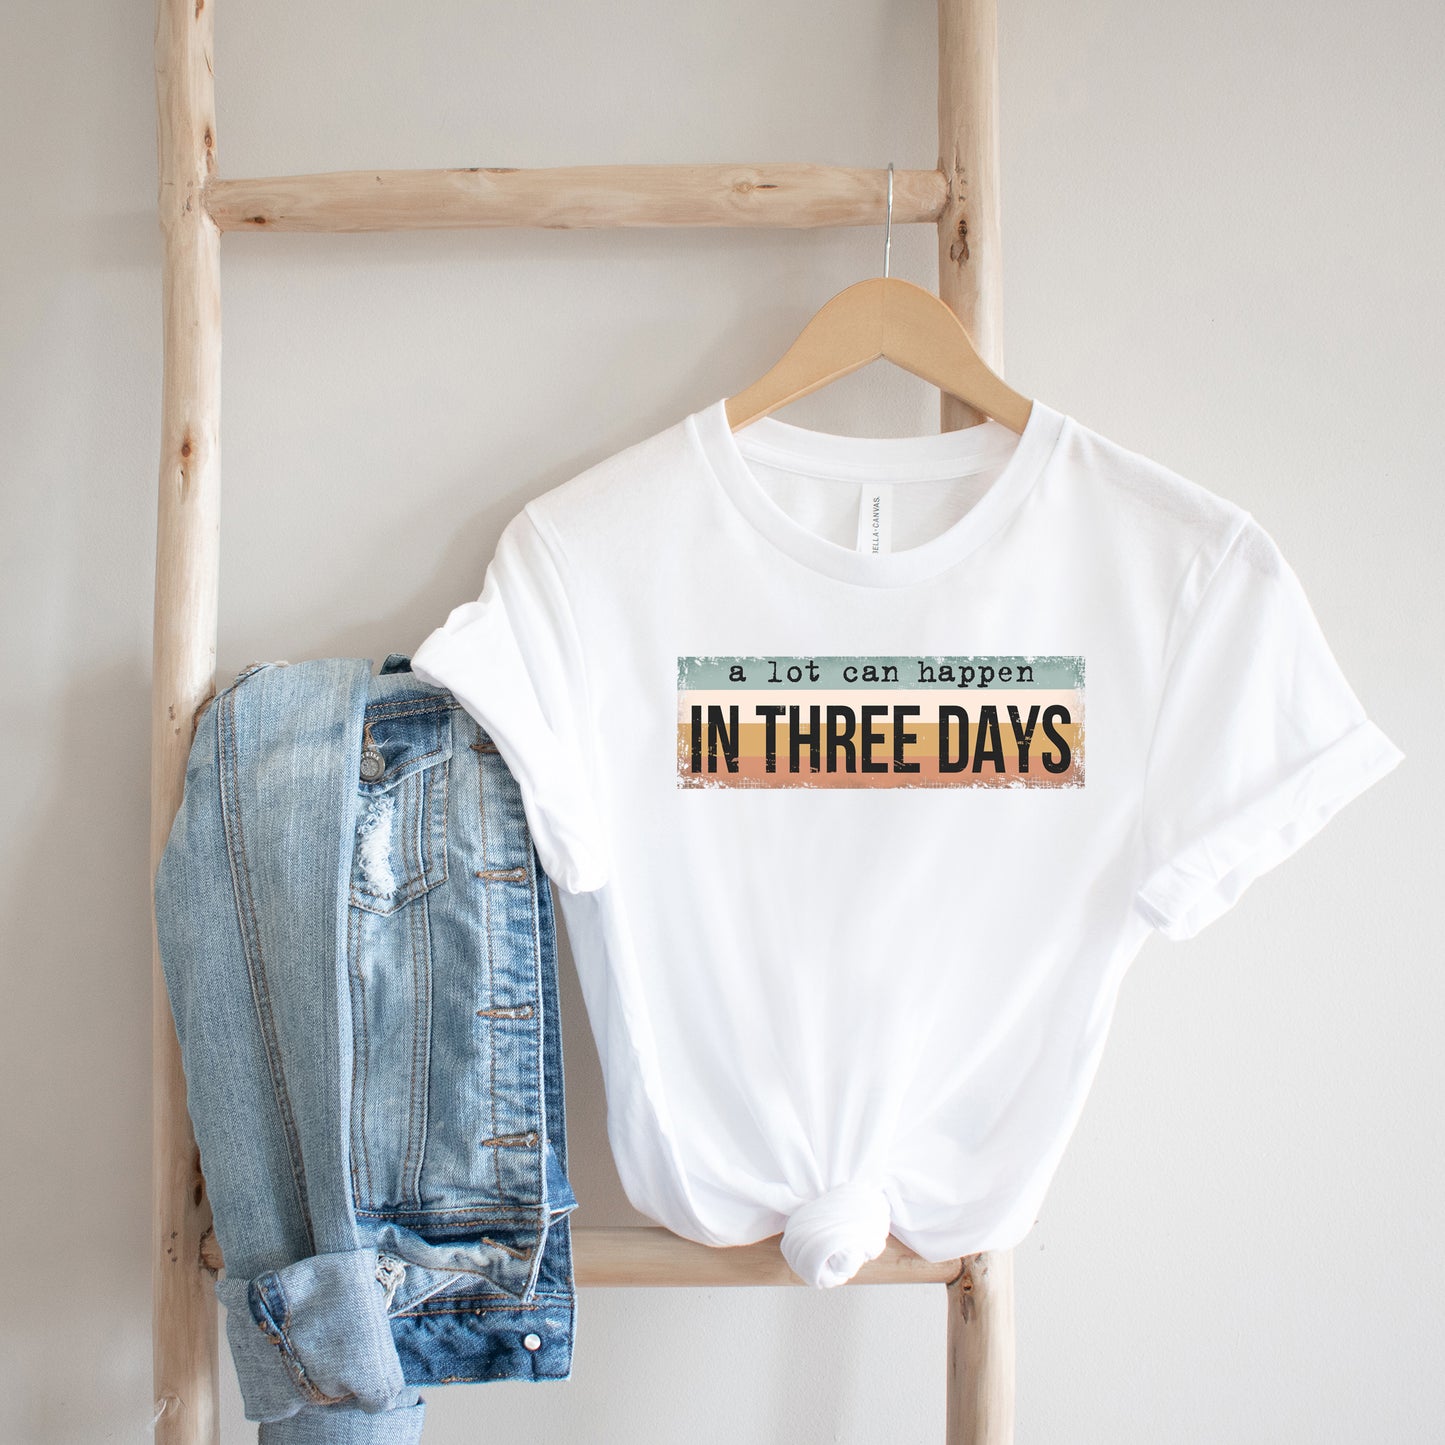 A Lot Can Happen In Three Days Colorful | Short Sleeve Crew Neck